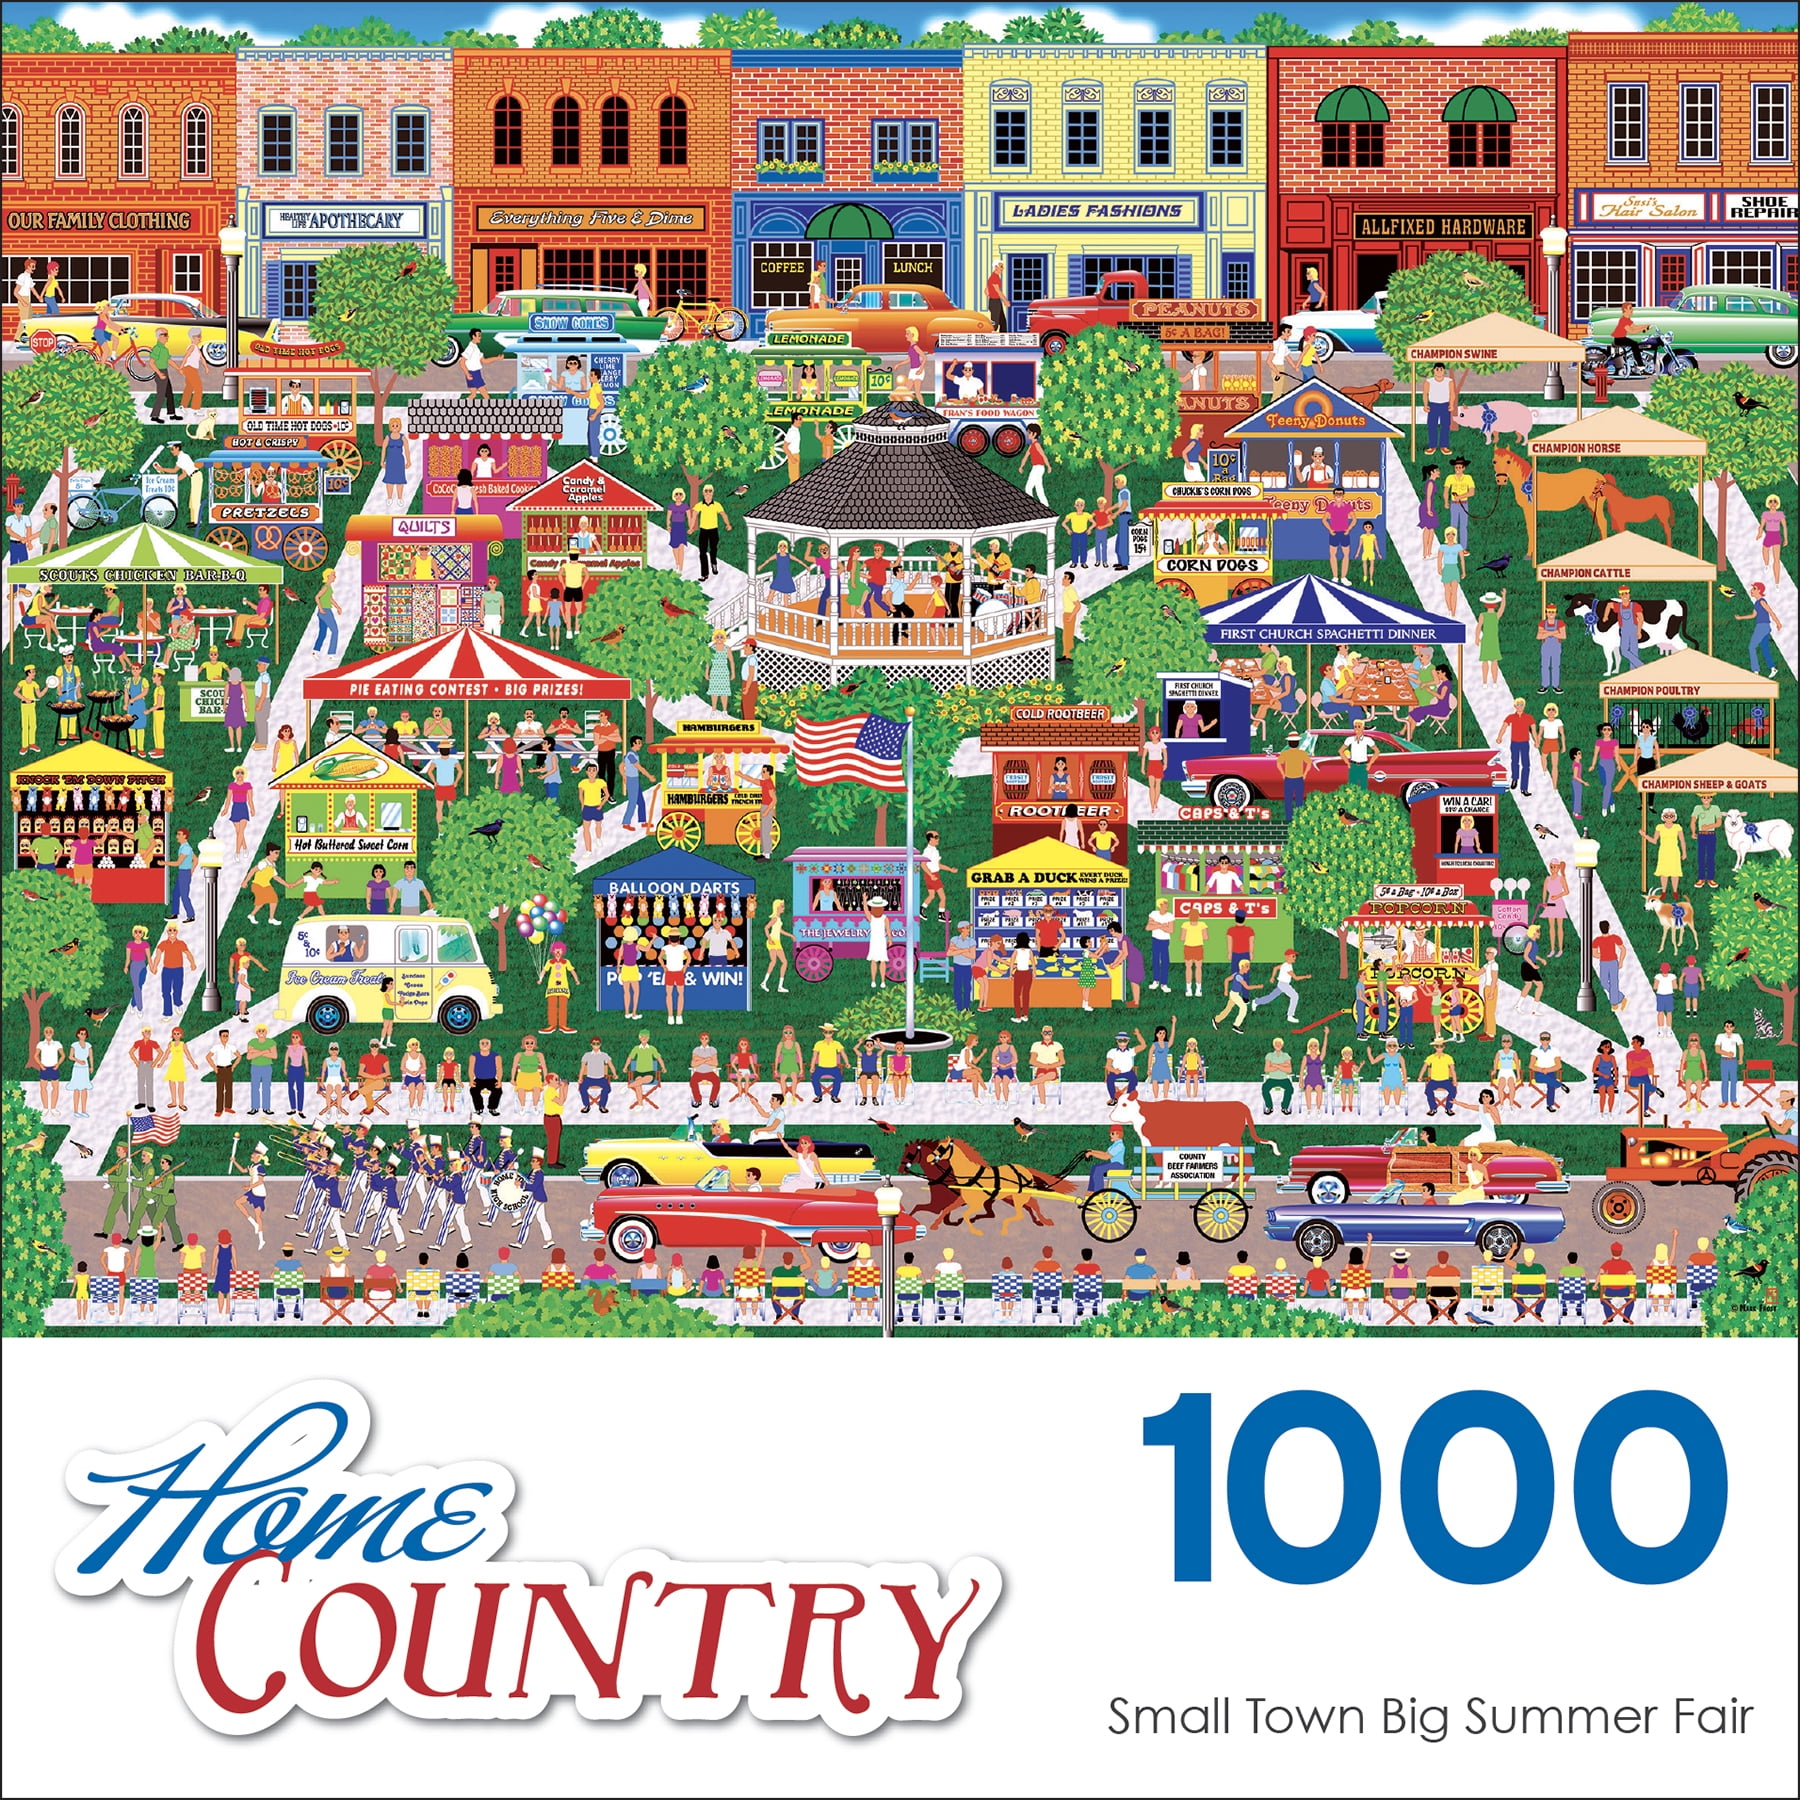 Small Town Big Summer Fair CRA-Z-ART 1000 PC Jigsaw Puzzle Home Country Frost for sale online 